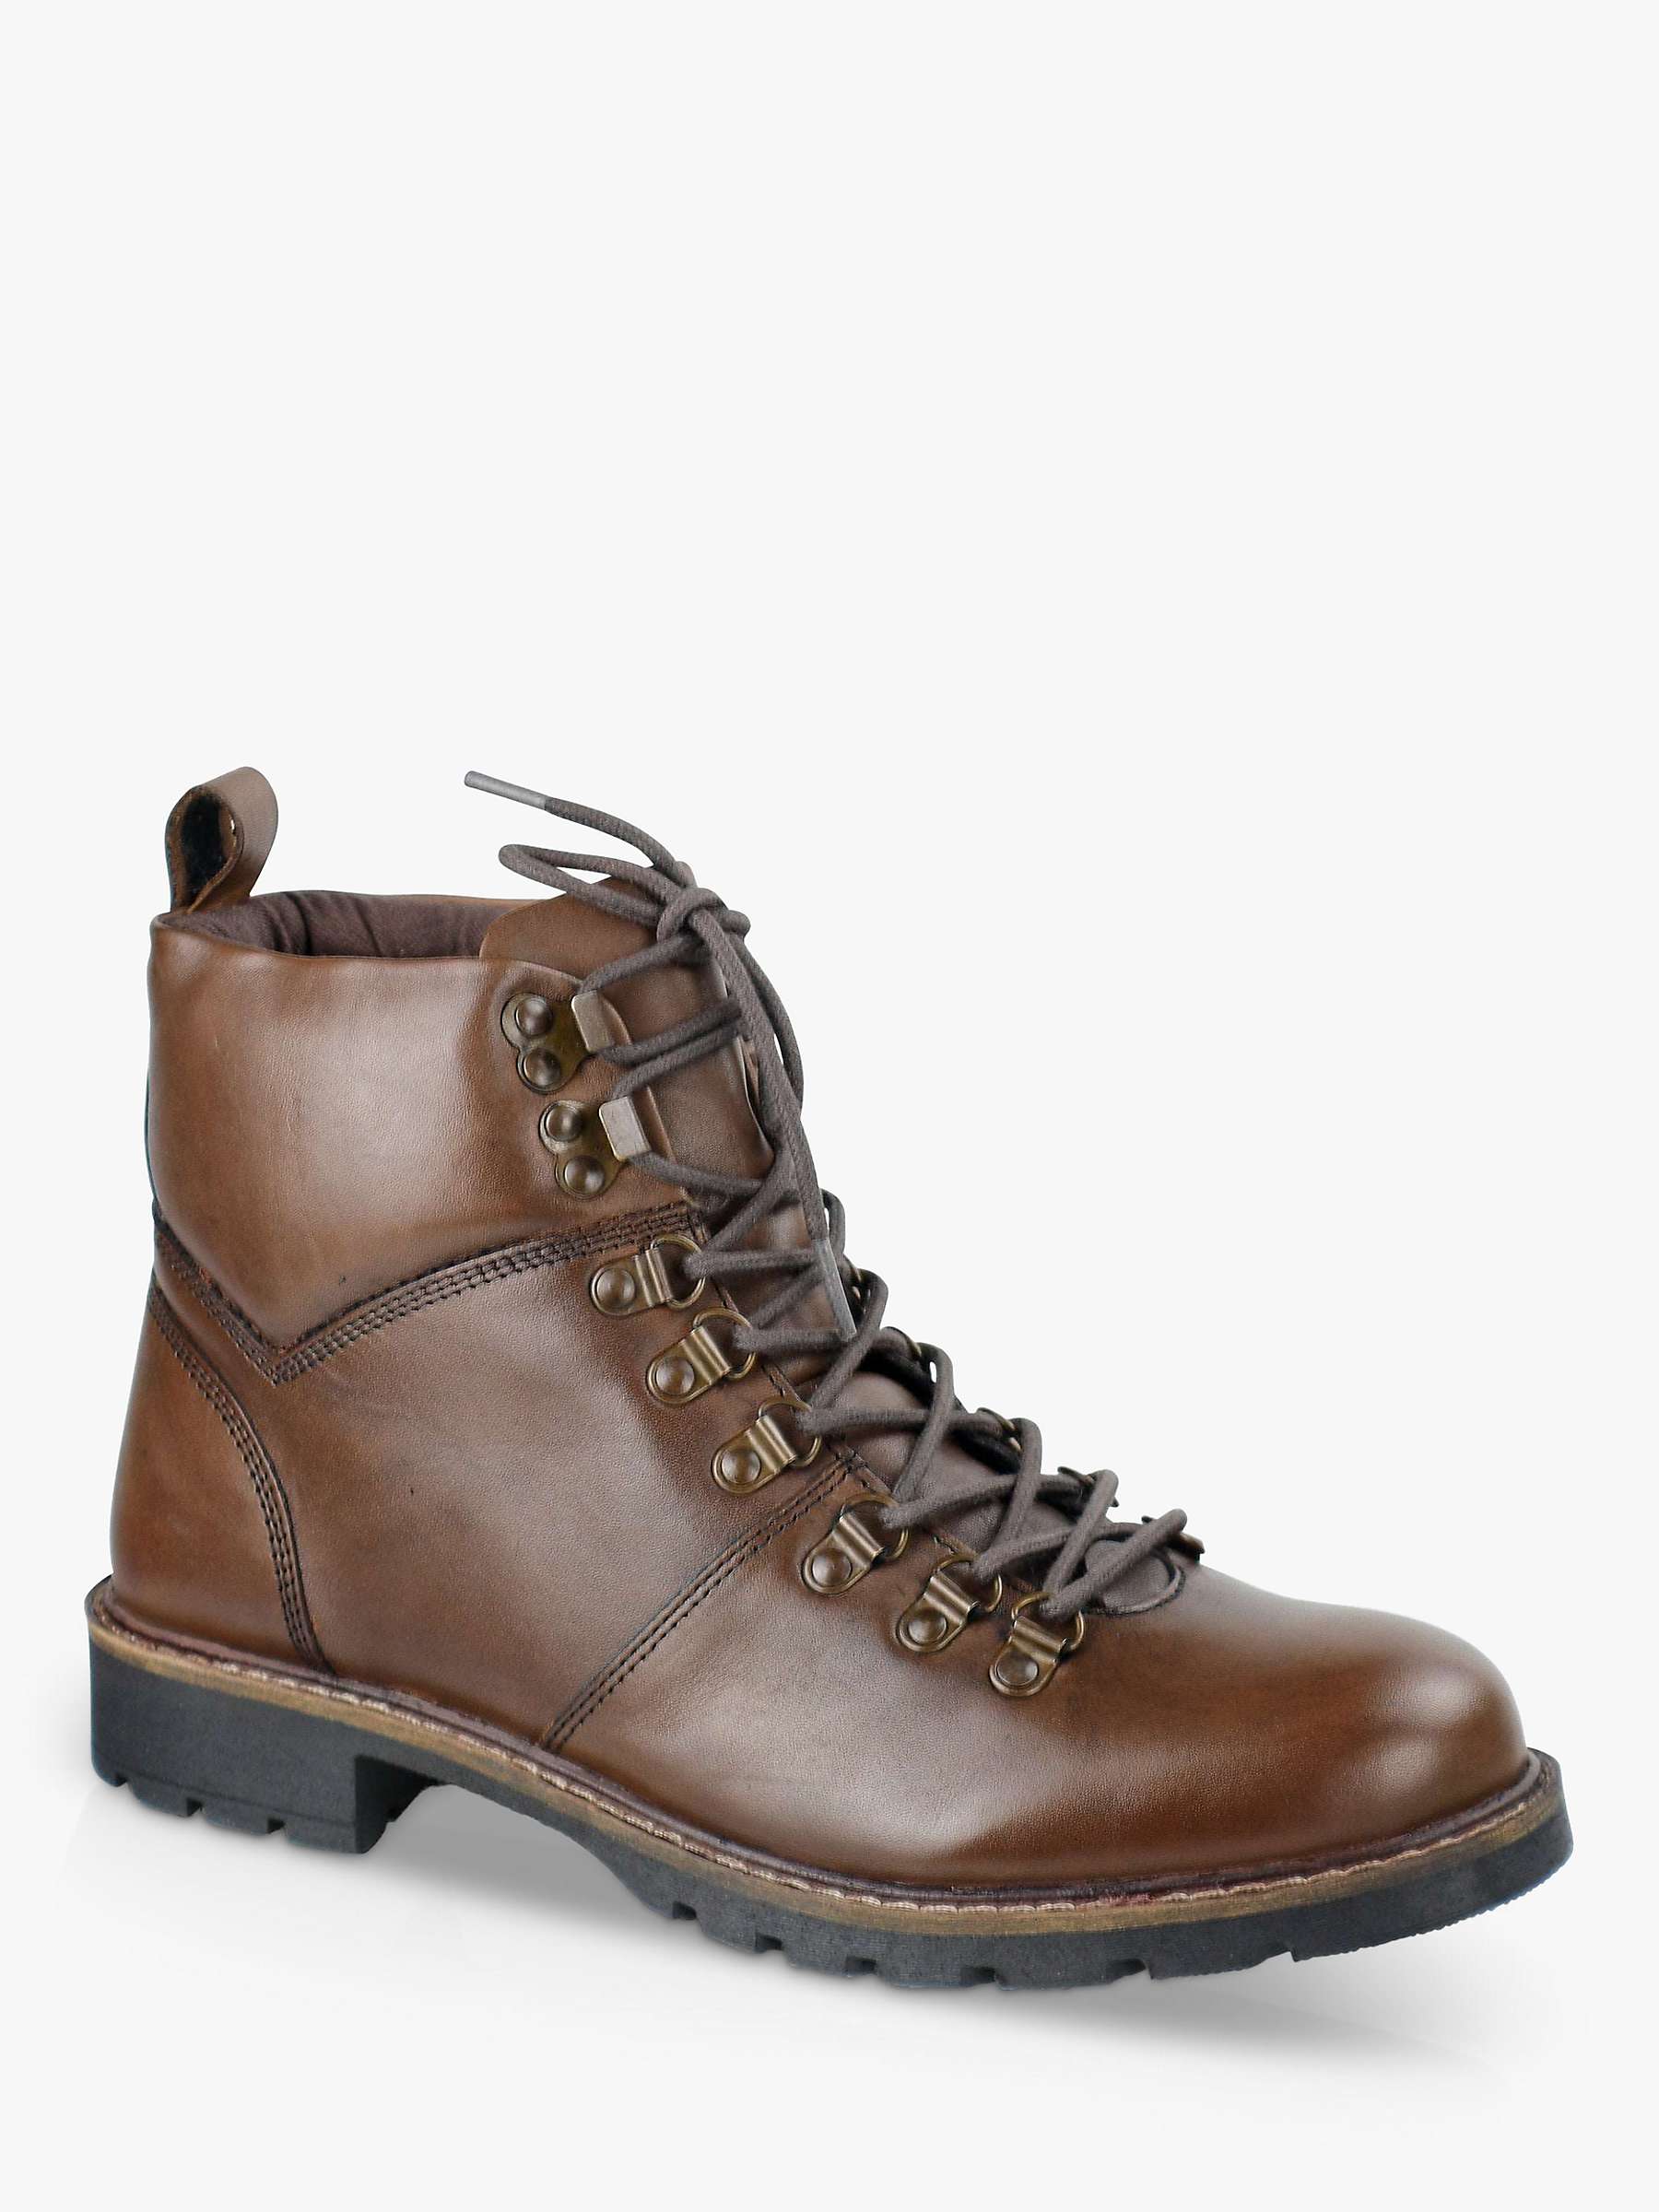 Buy Silver Street London Marble Leather Lace Up Boots, Brown Online at johnlewis.com